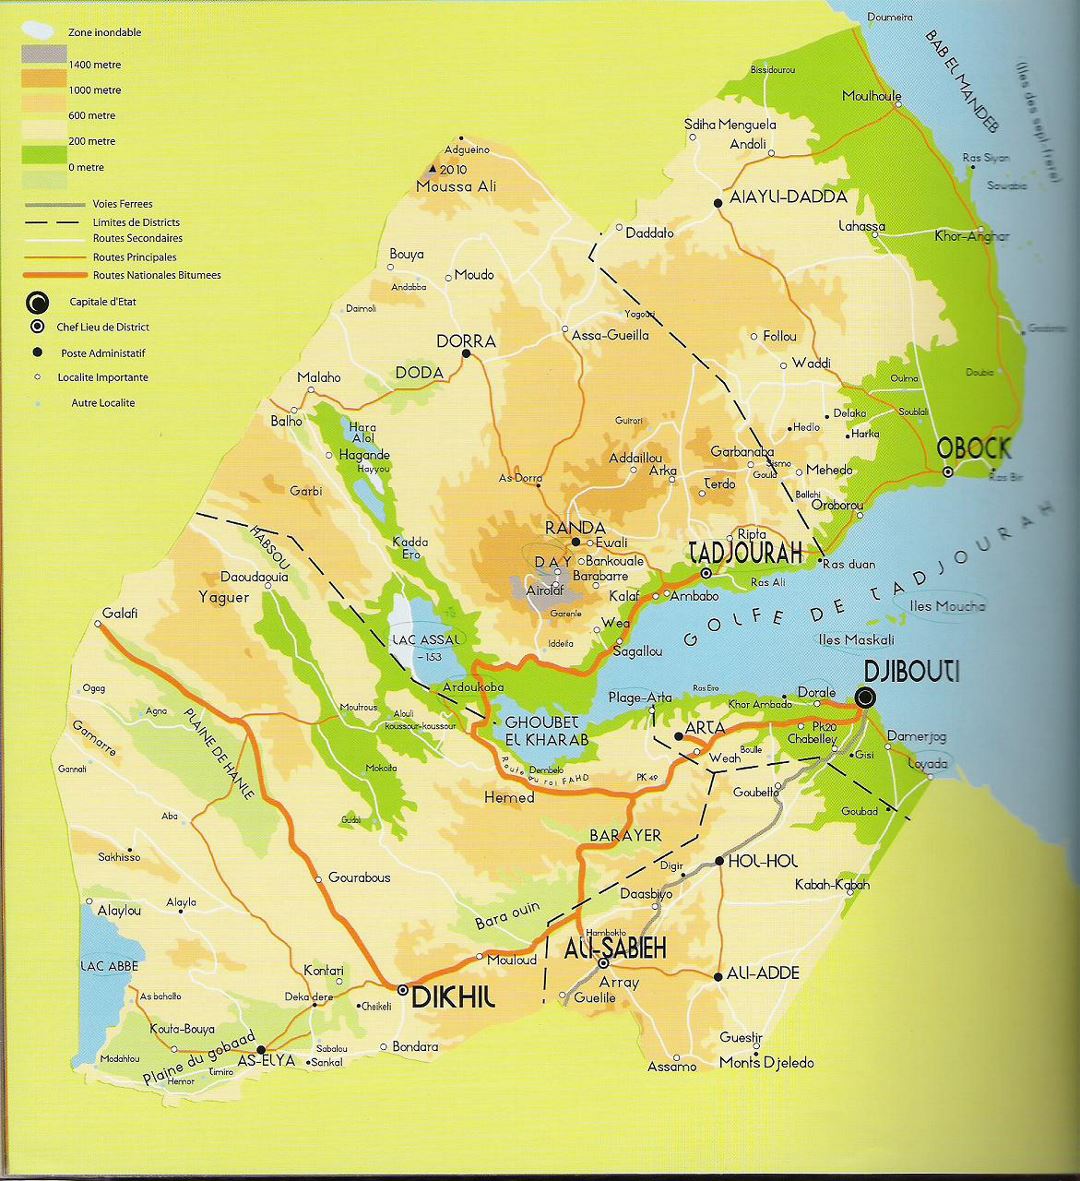 Detailed Elevation Map Of Djibouti With Roads And Cities Small 